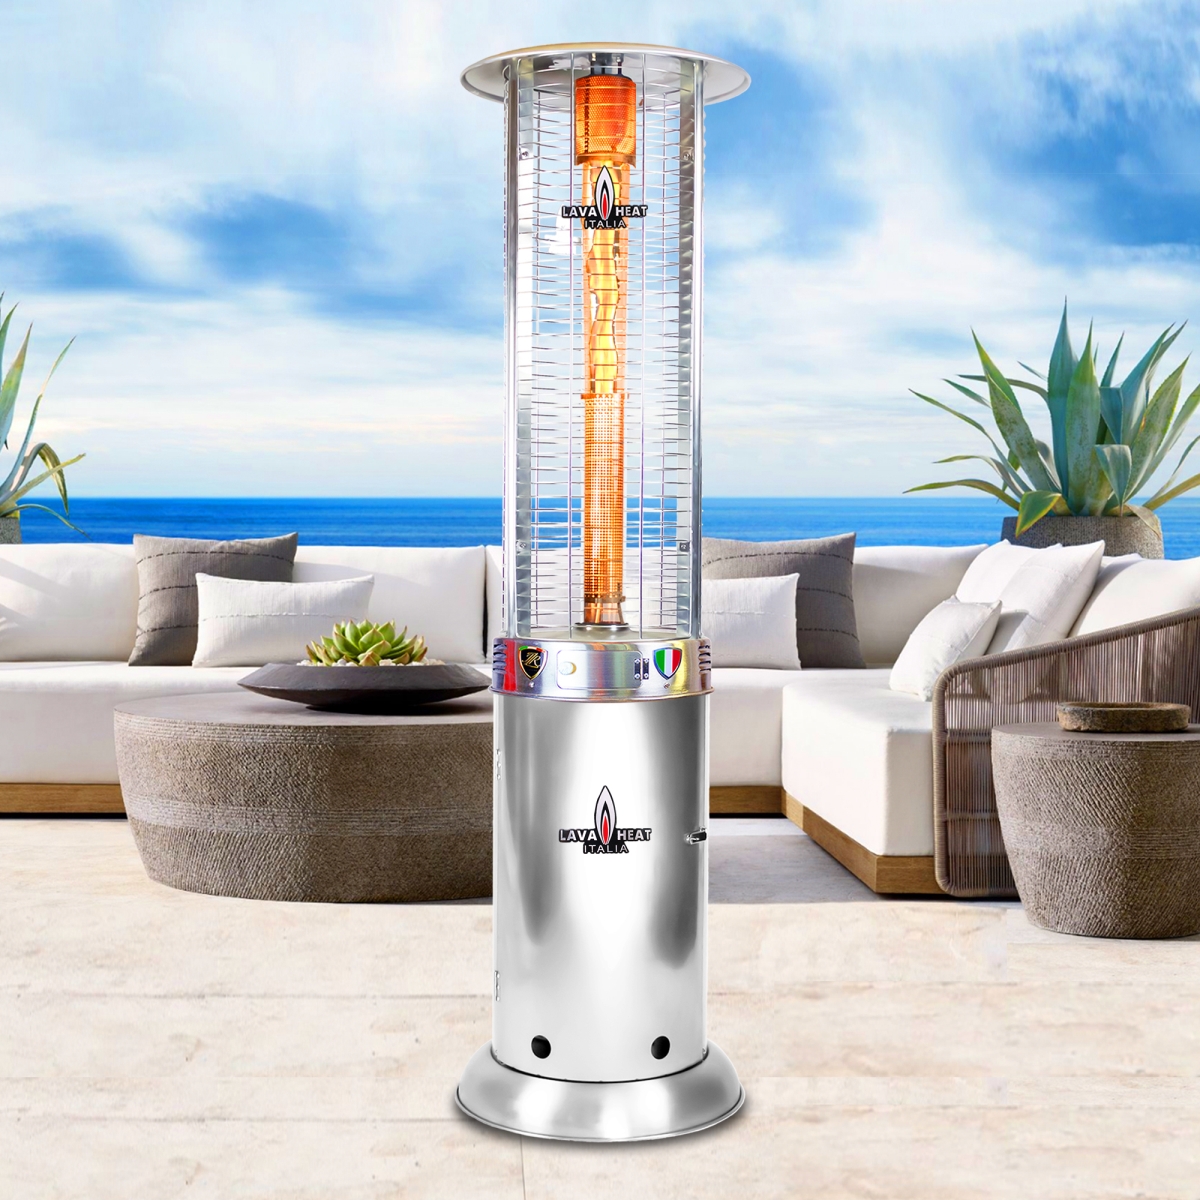 Rl7mgs 7 Ft. Manual Ignition Opus Lite R-line Commercial Natural Gas Flame Tower Heater - Stainless Steel